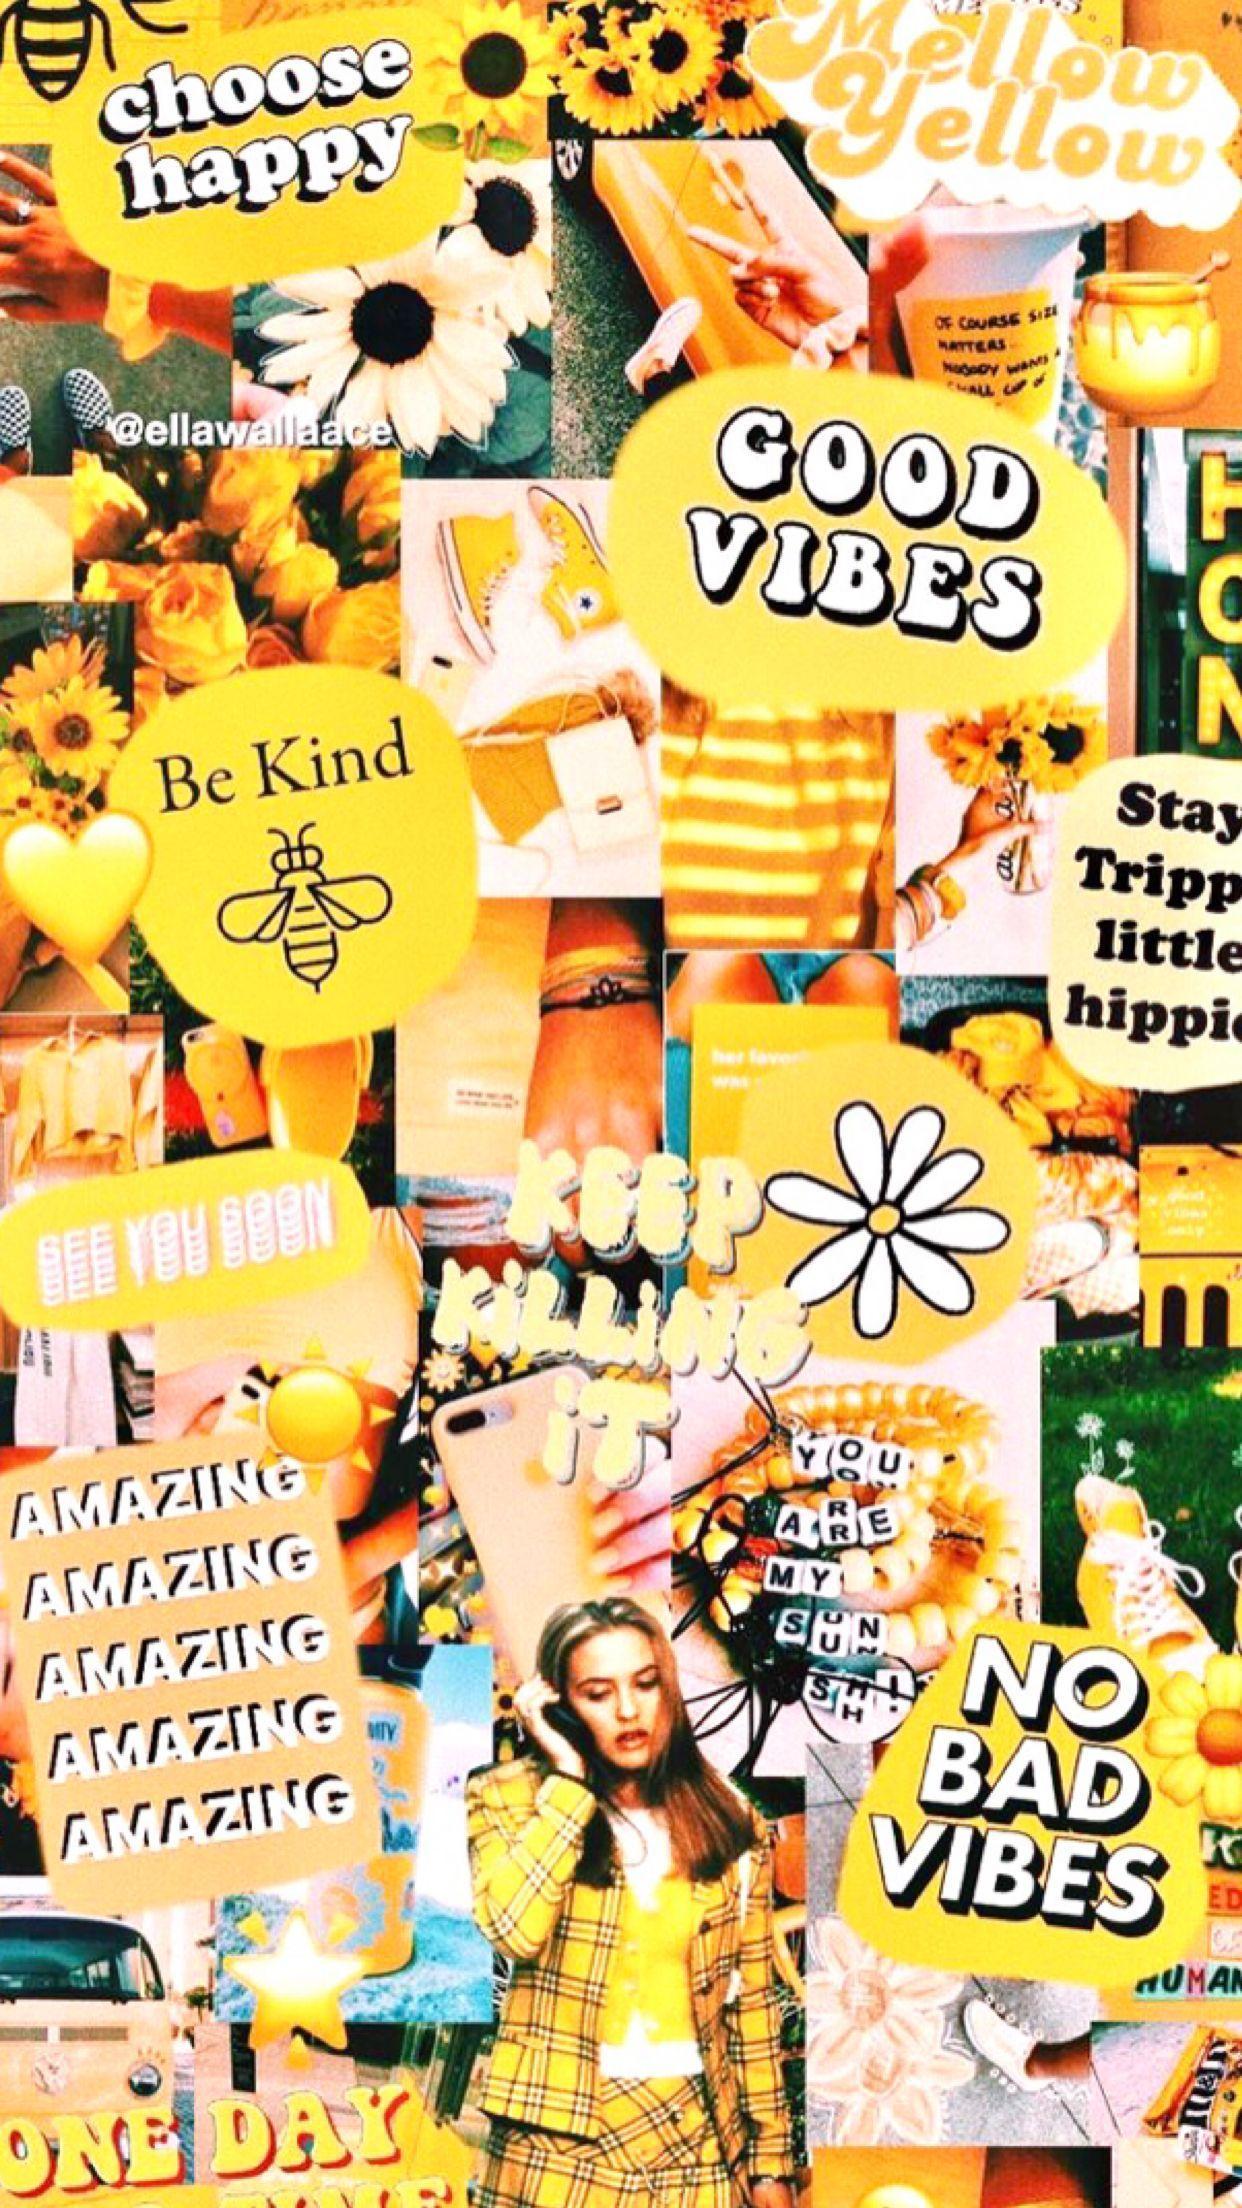 Aesthetic background with yellow elements and text. - VSCO, 90s